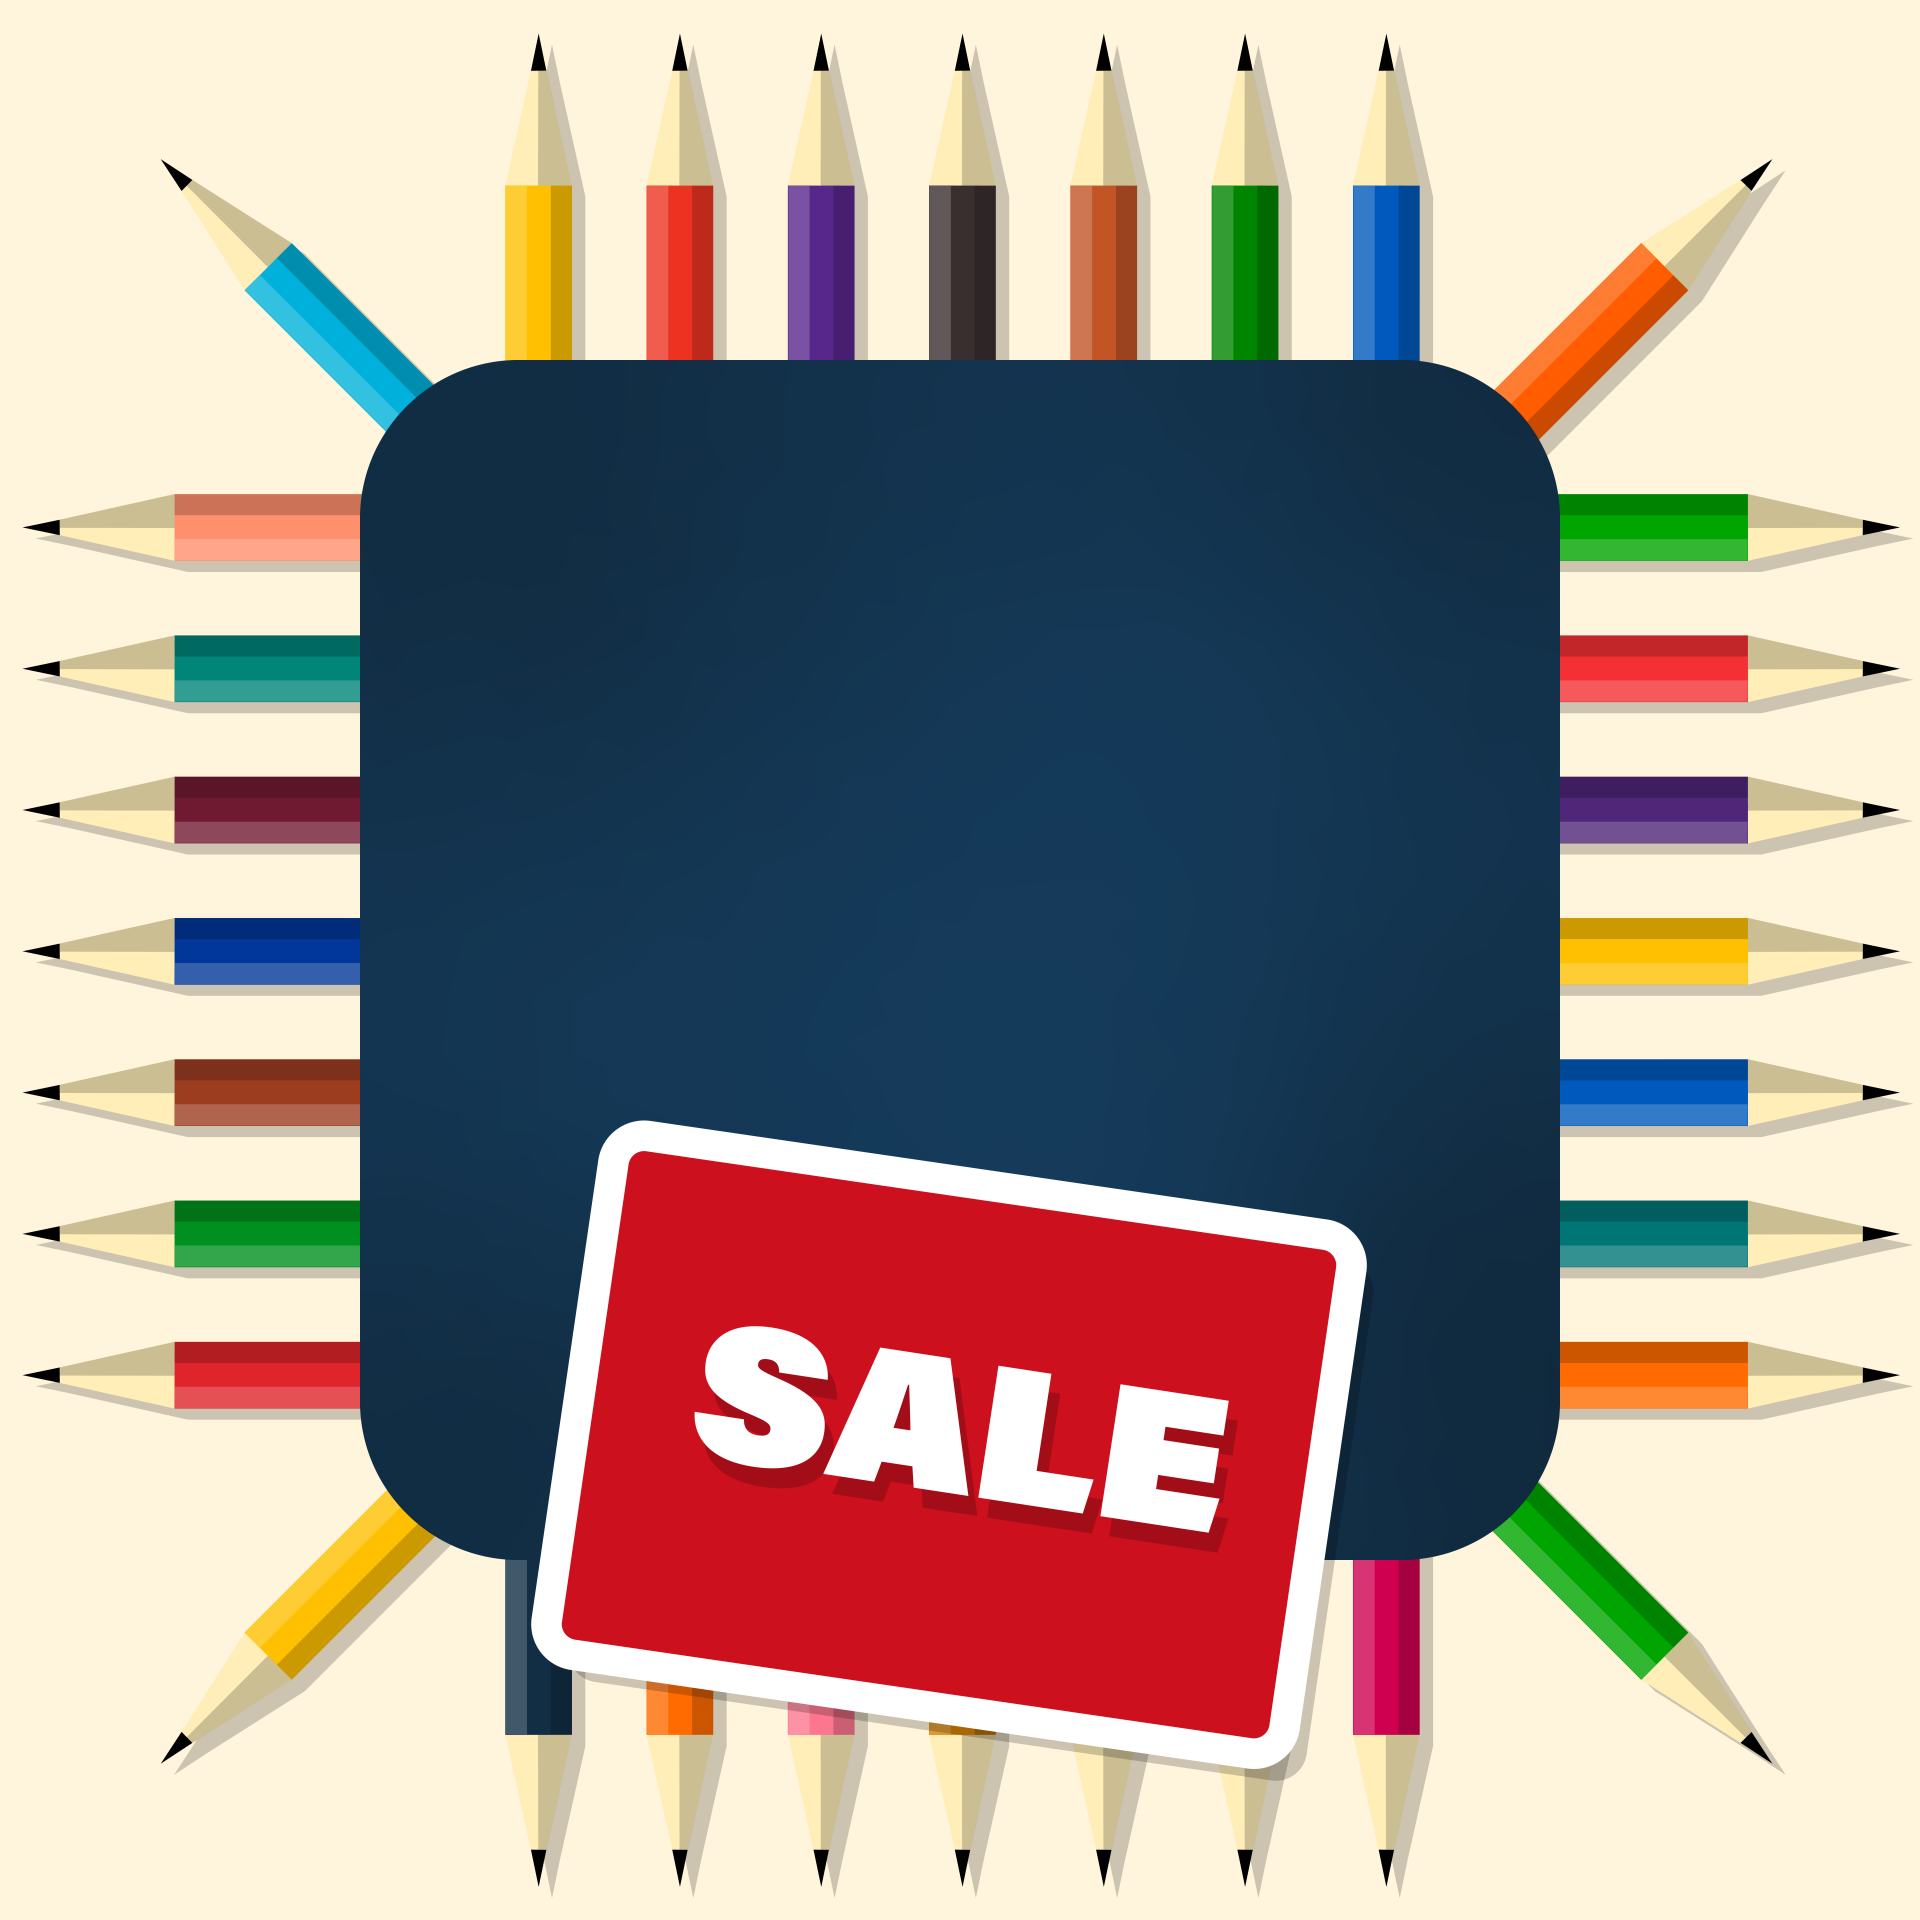 A blank blackboard with colored pencils and a sale label illustration